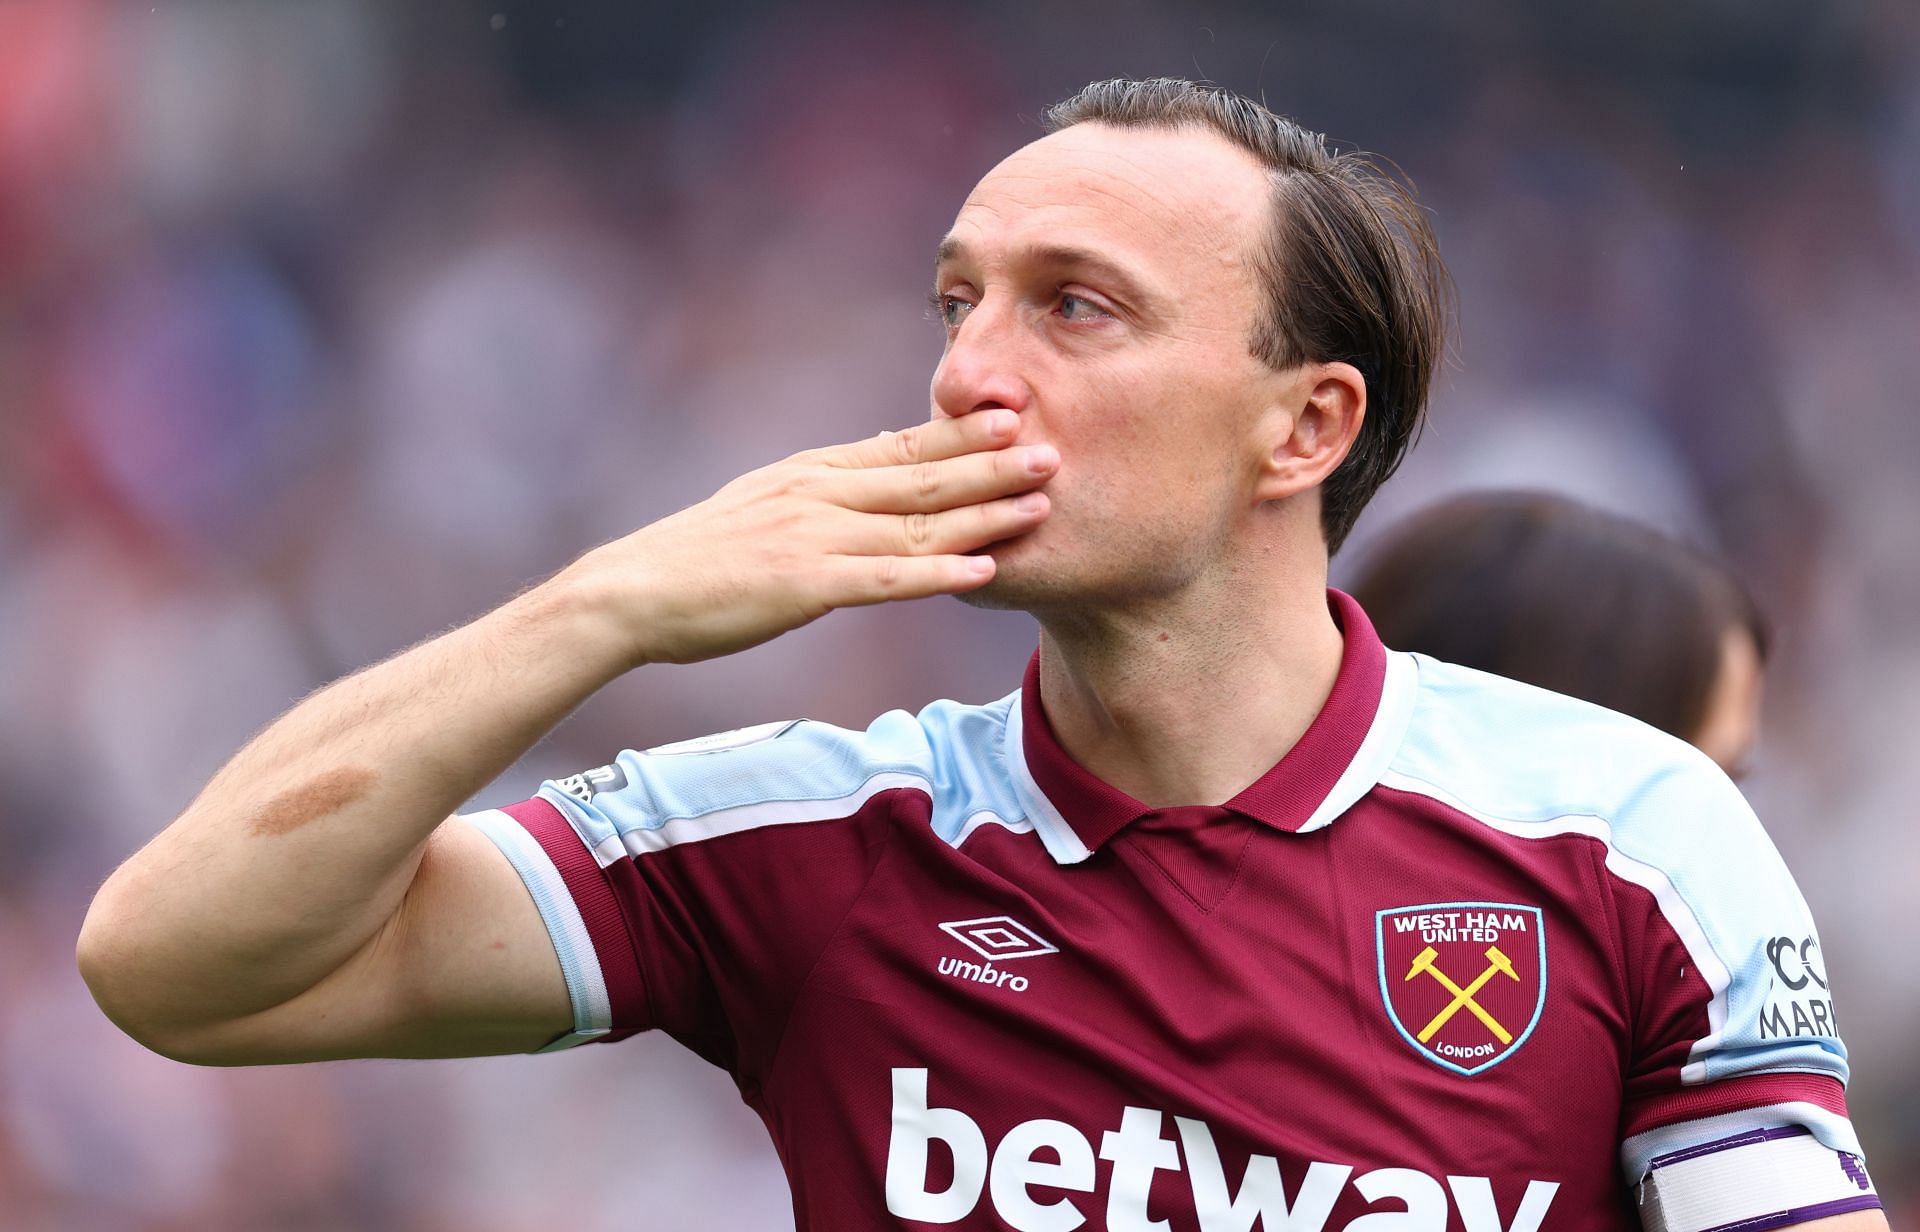 Mark Noble announced his retirement from professional football